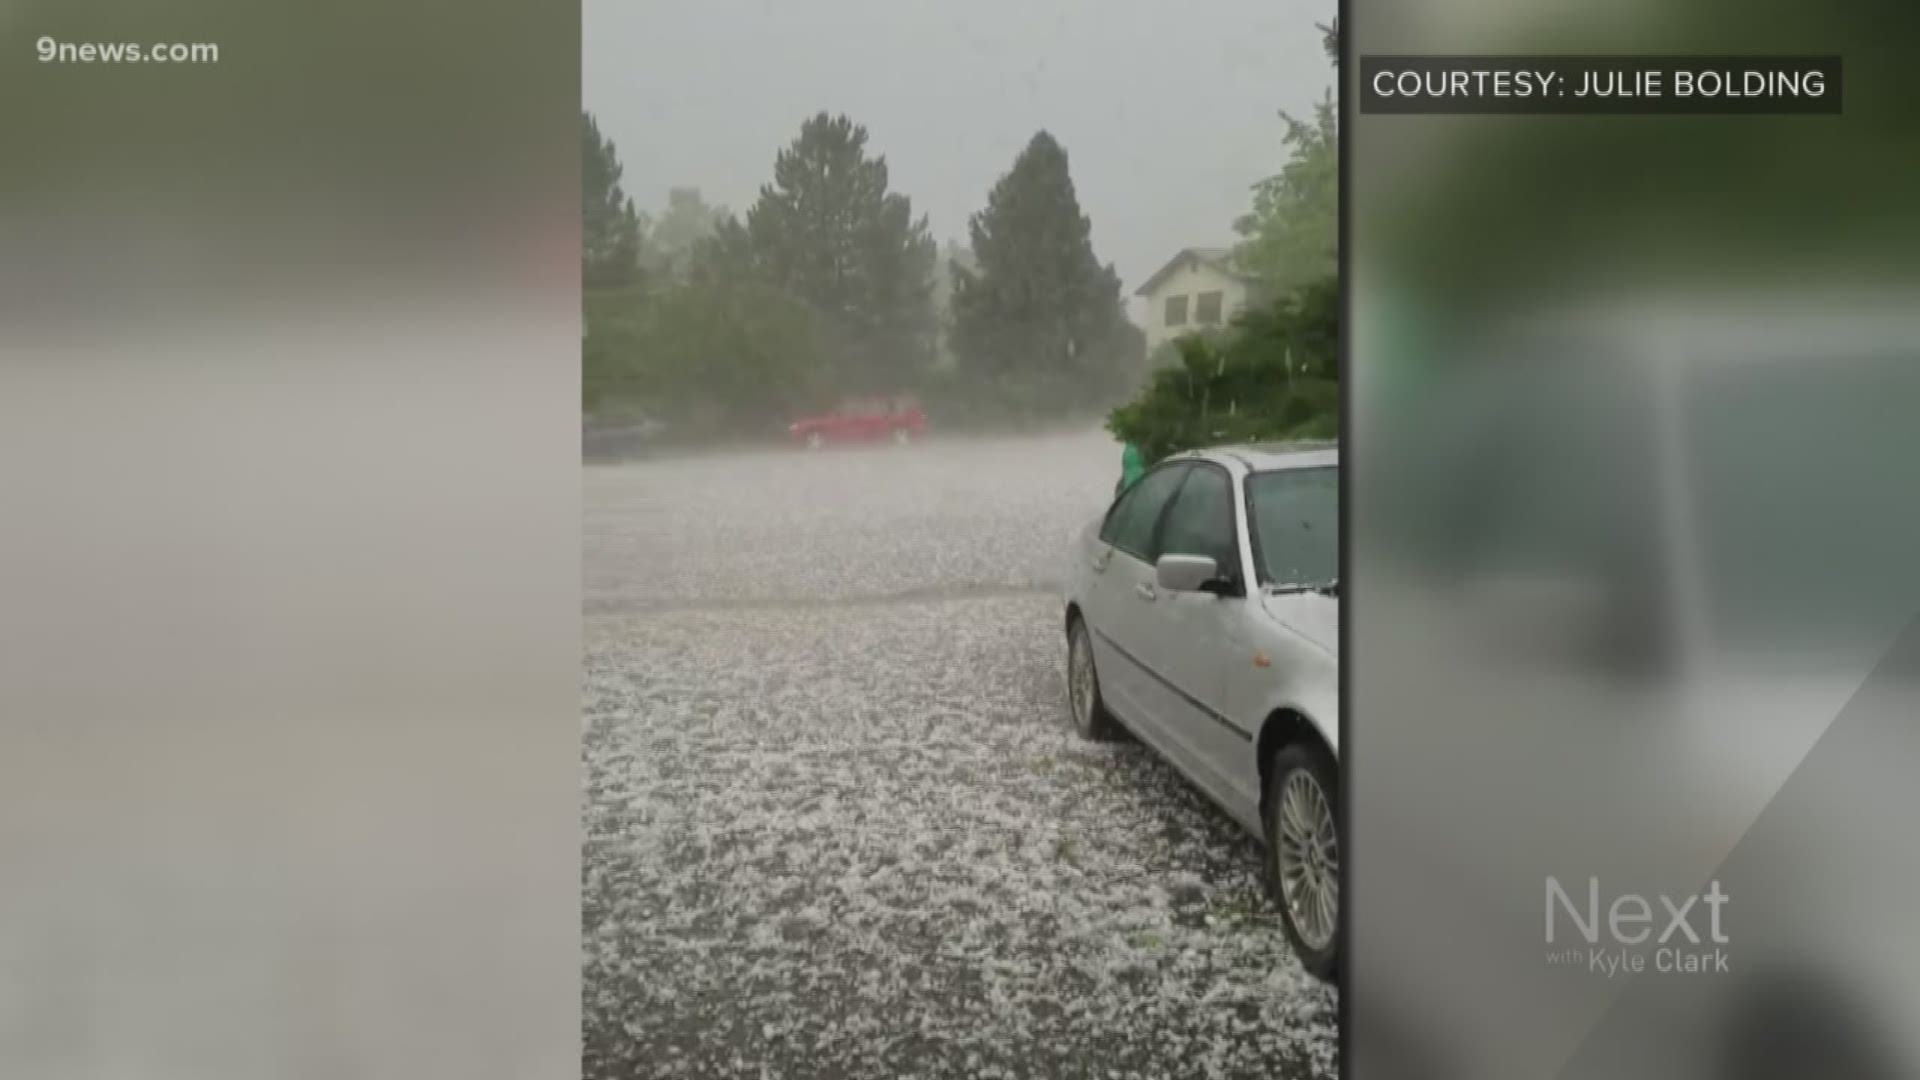 It's hail season, Colorado, and plenty of cars are already sporting new tattoos after our recent hailstorm. This is why insurance companies may think it'll take a while to get the damage fixed.